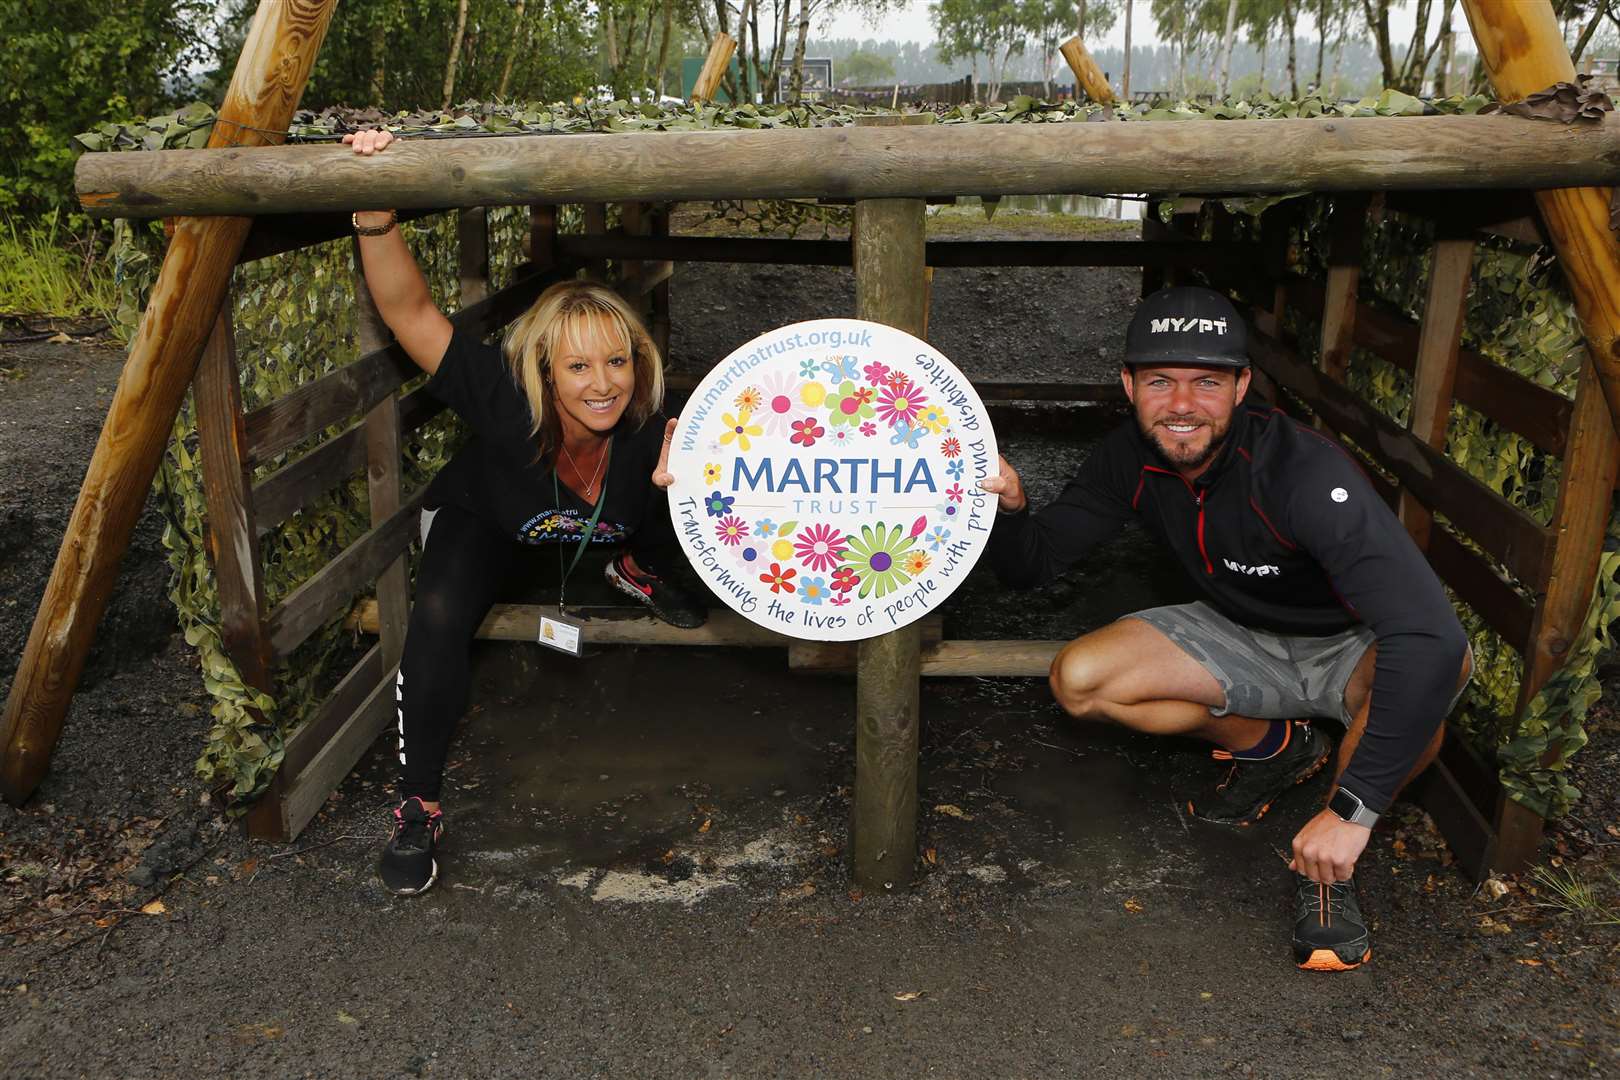 Get down and dirty in a new assault course challenge hosted by MY/PT and Martha Trust